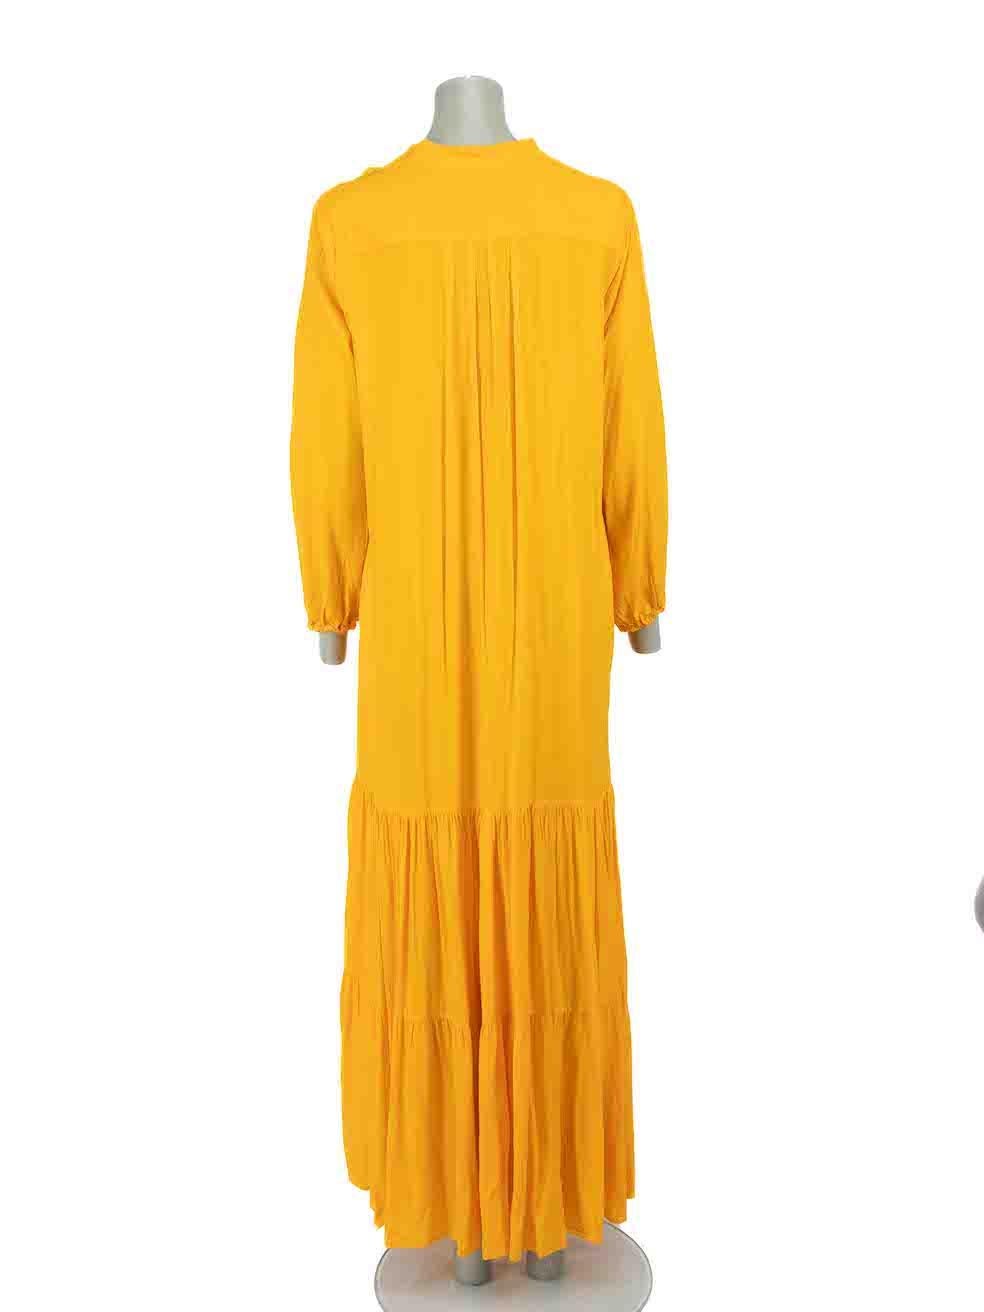 Melissa Odabash Orange Tiered Maxi Dress Size M In Excellent Condition For Sale In London, GB